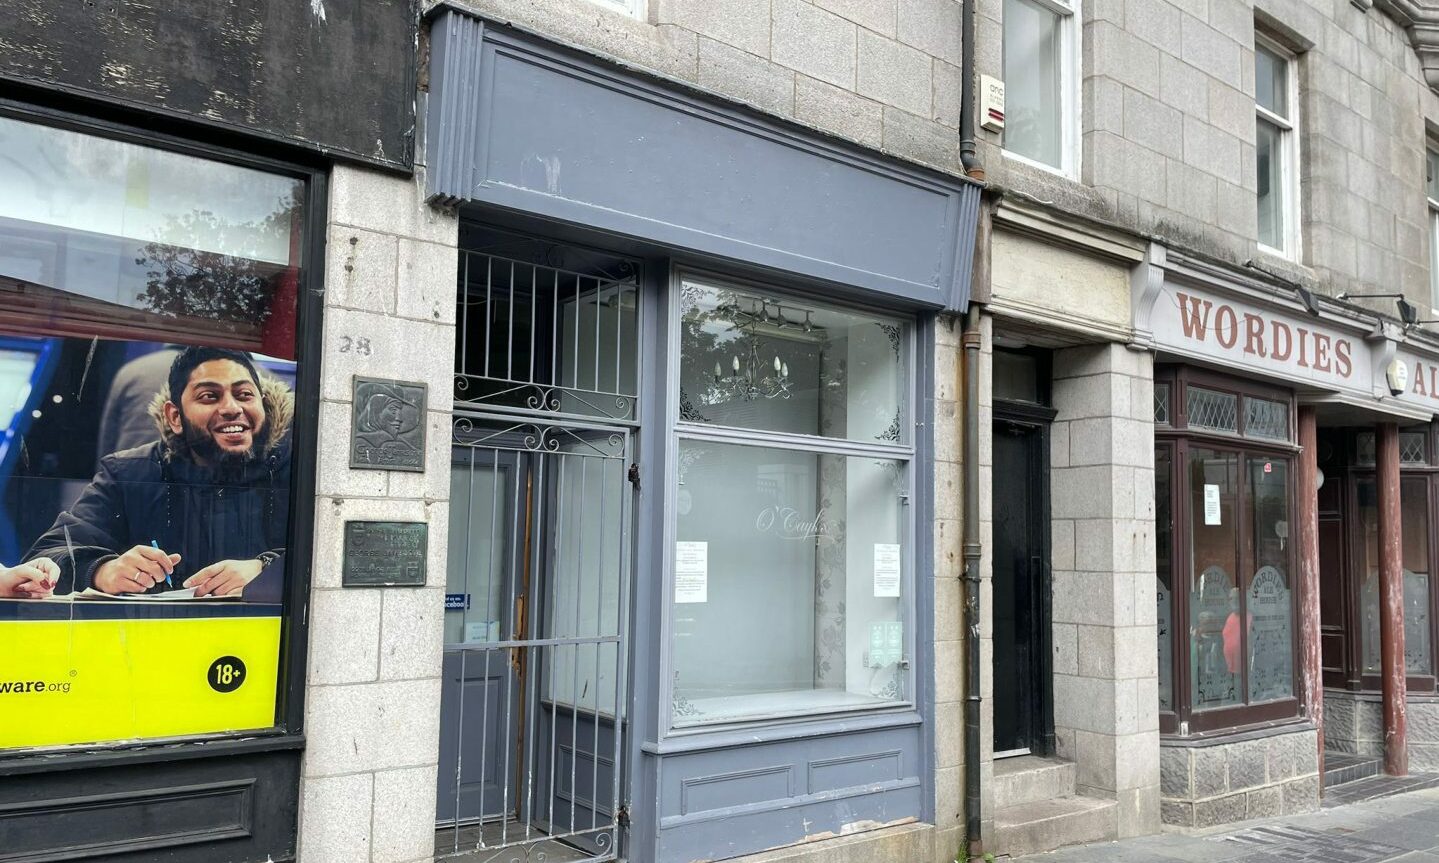 A vacant shop on Uperkirkgate, Aberdeen council are being urged to end remote work to support businesses and prevent empty shops like this